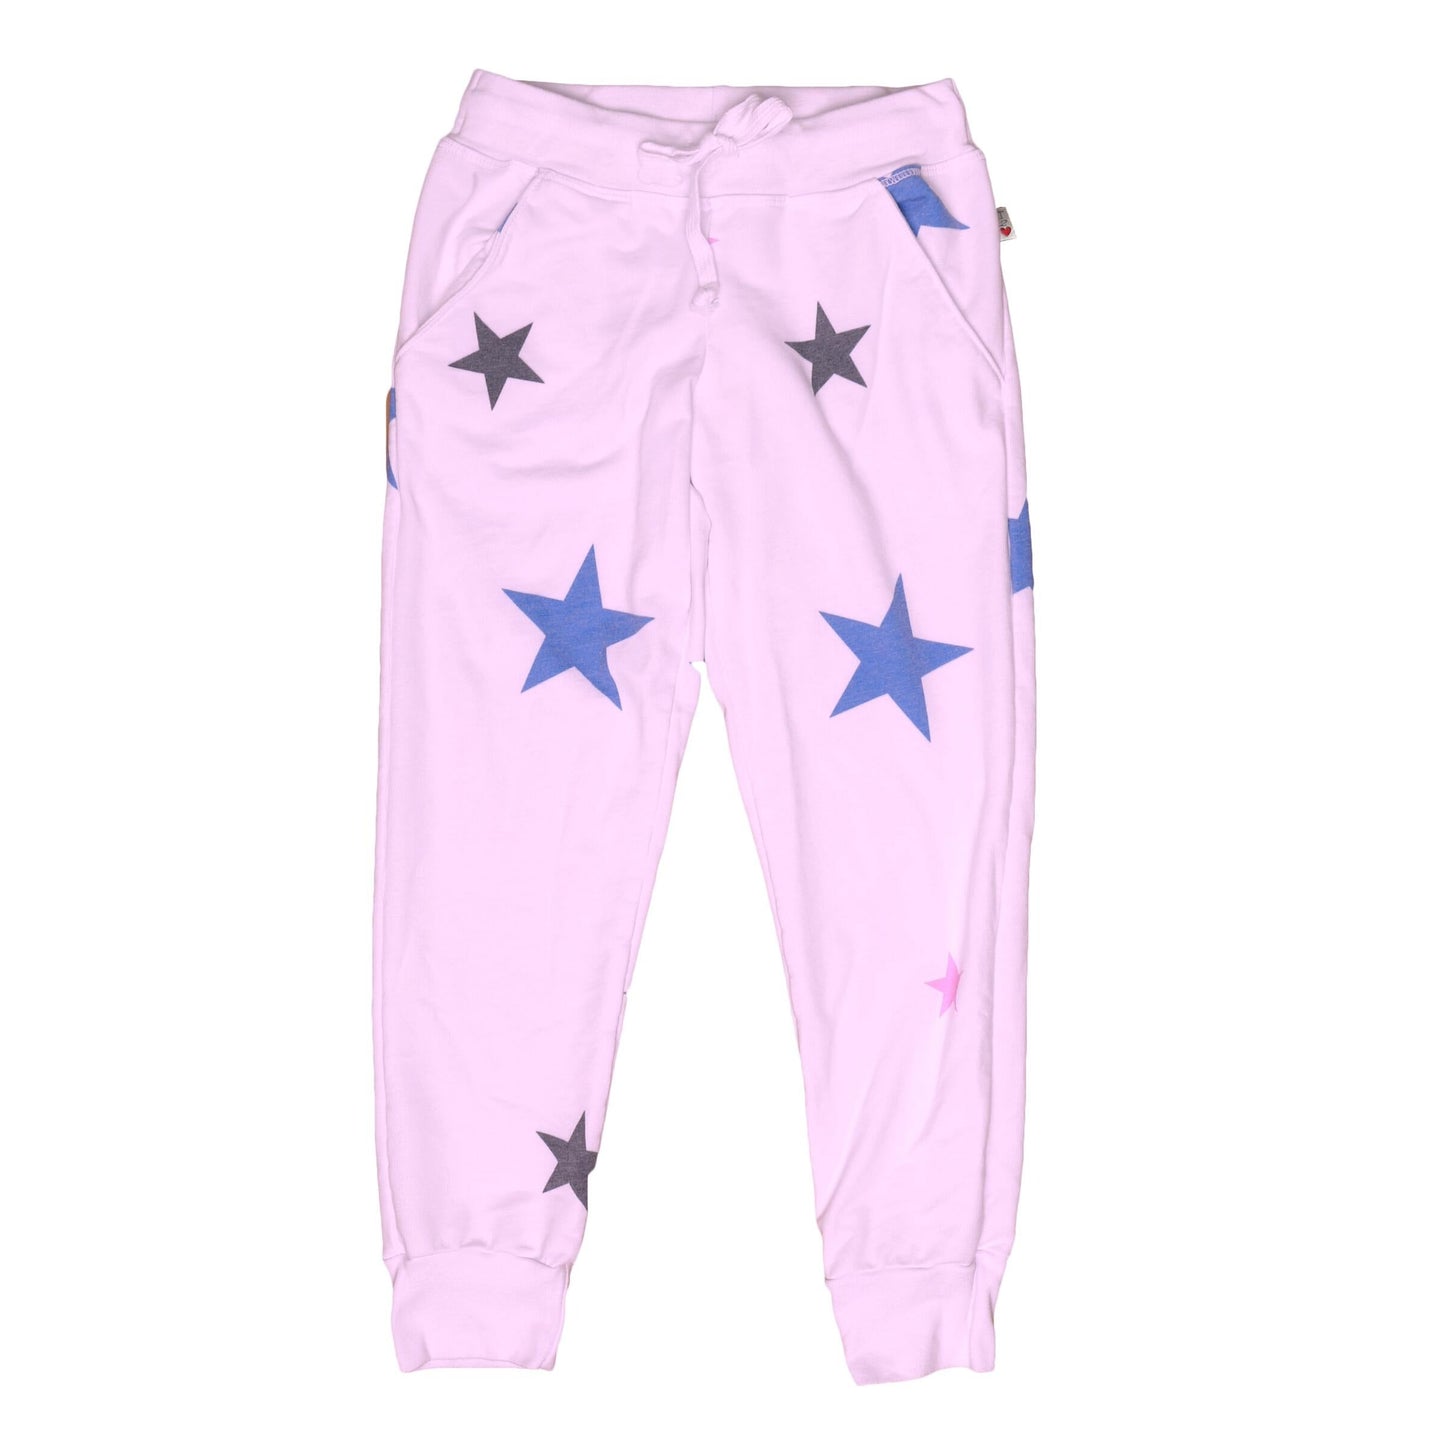 Colored-Stars Slouch Sweatpants